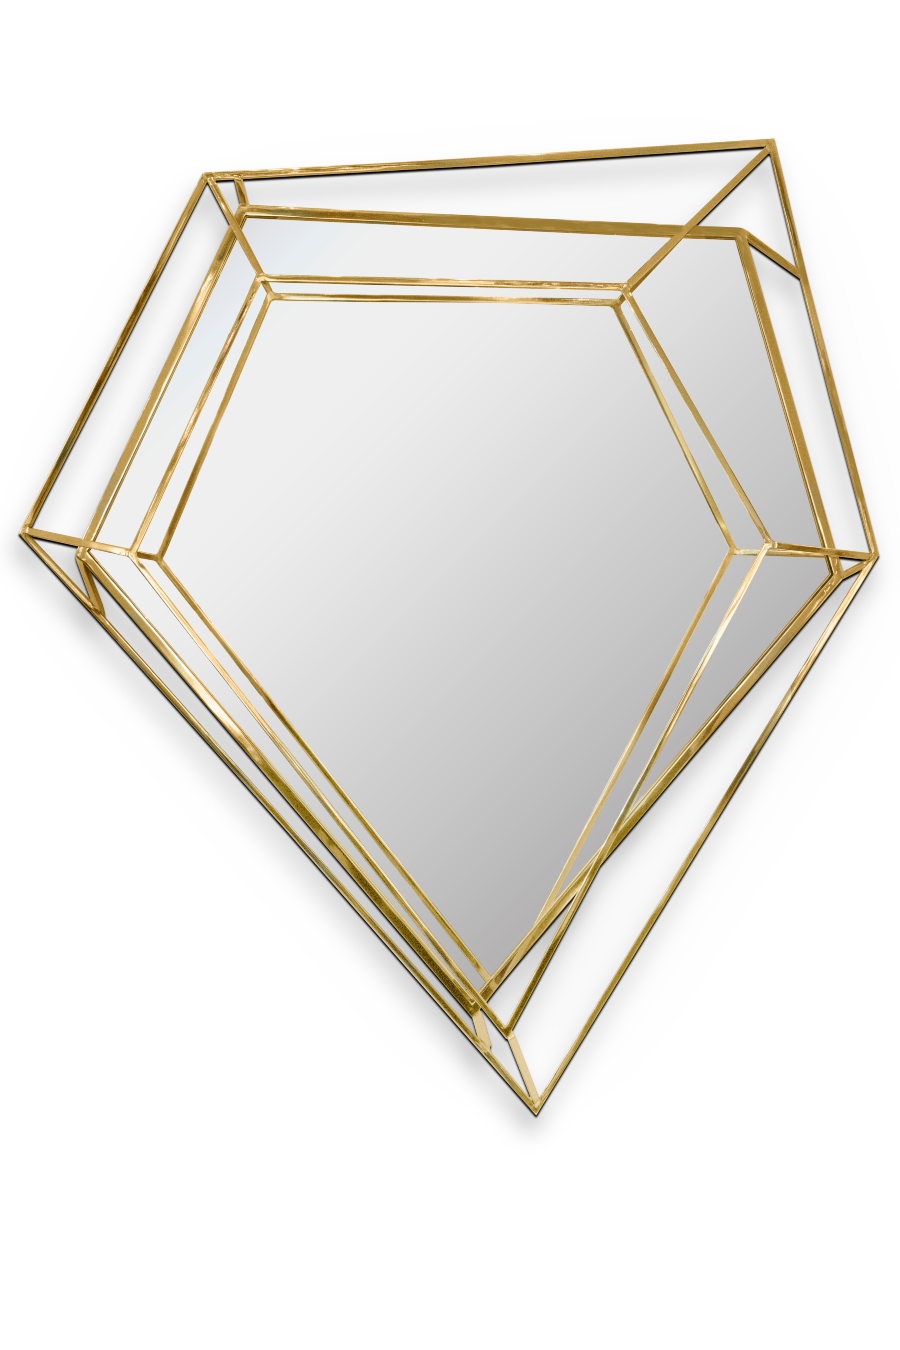 Diamond Family Collection - The Shining Gem in Your Home Decor home inspiration ideas